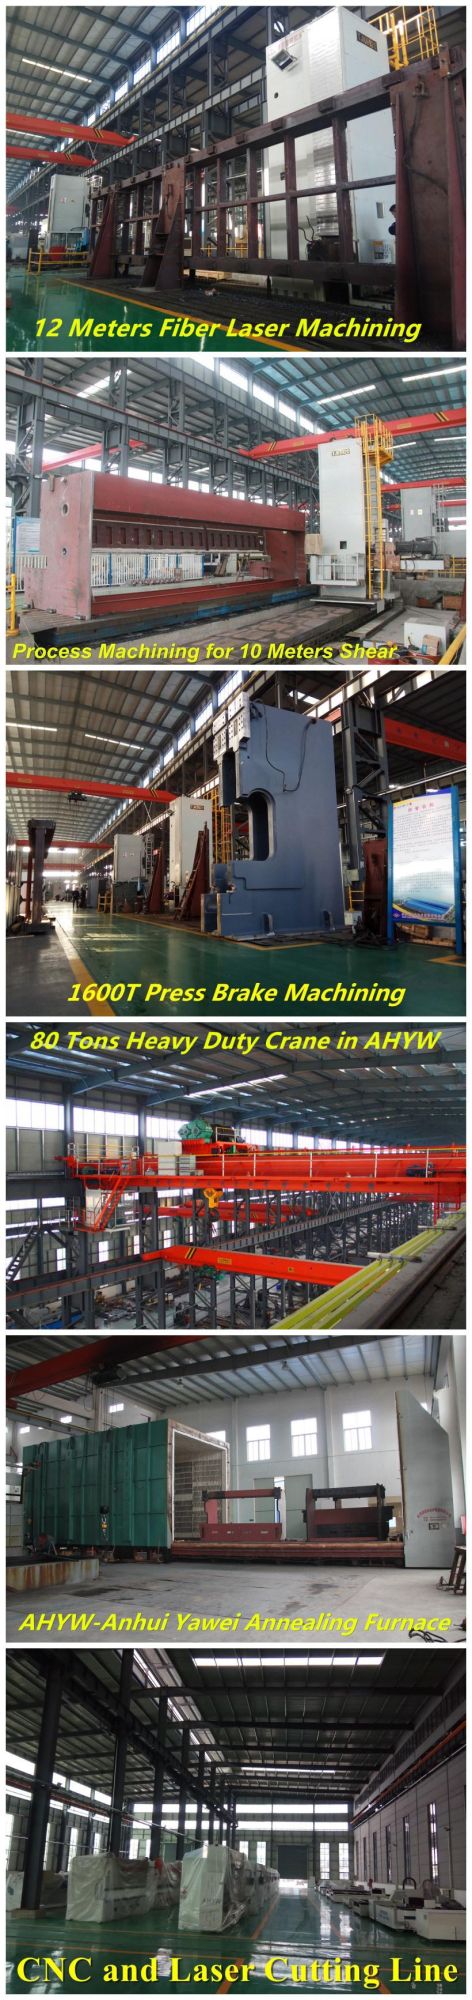 Used Hand Guillotine Machine From Anhui Yawei with Ahyw Logo for Metal Sheet Cutting